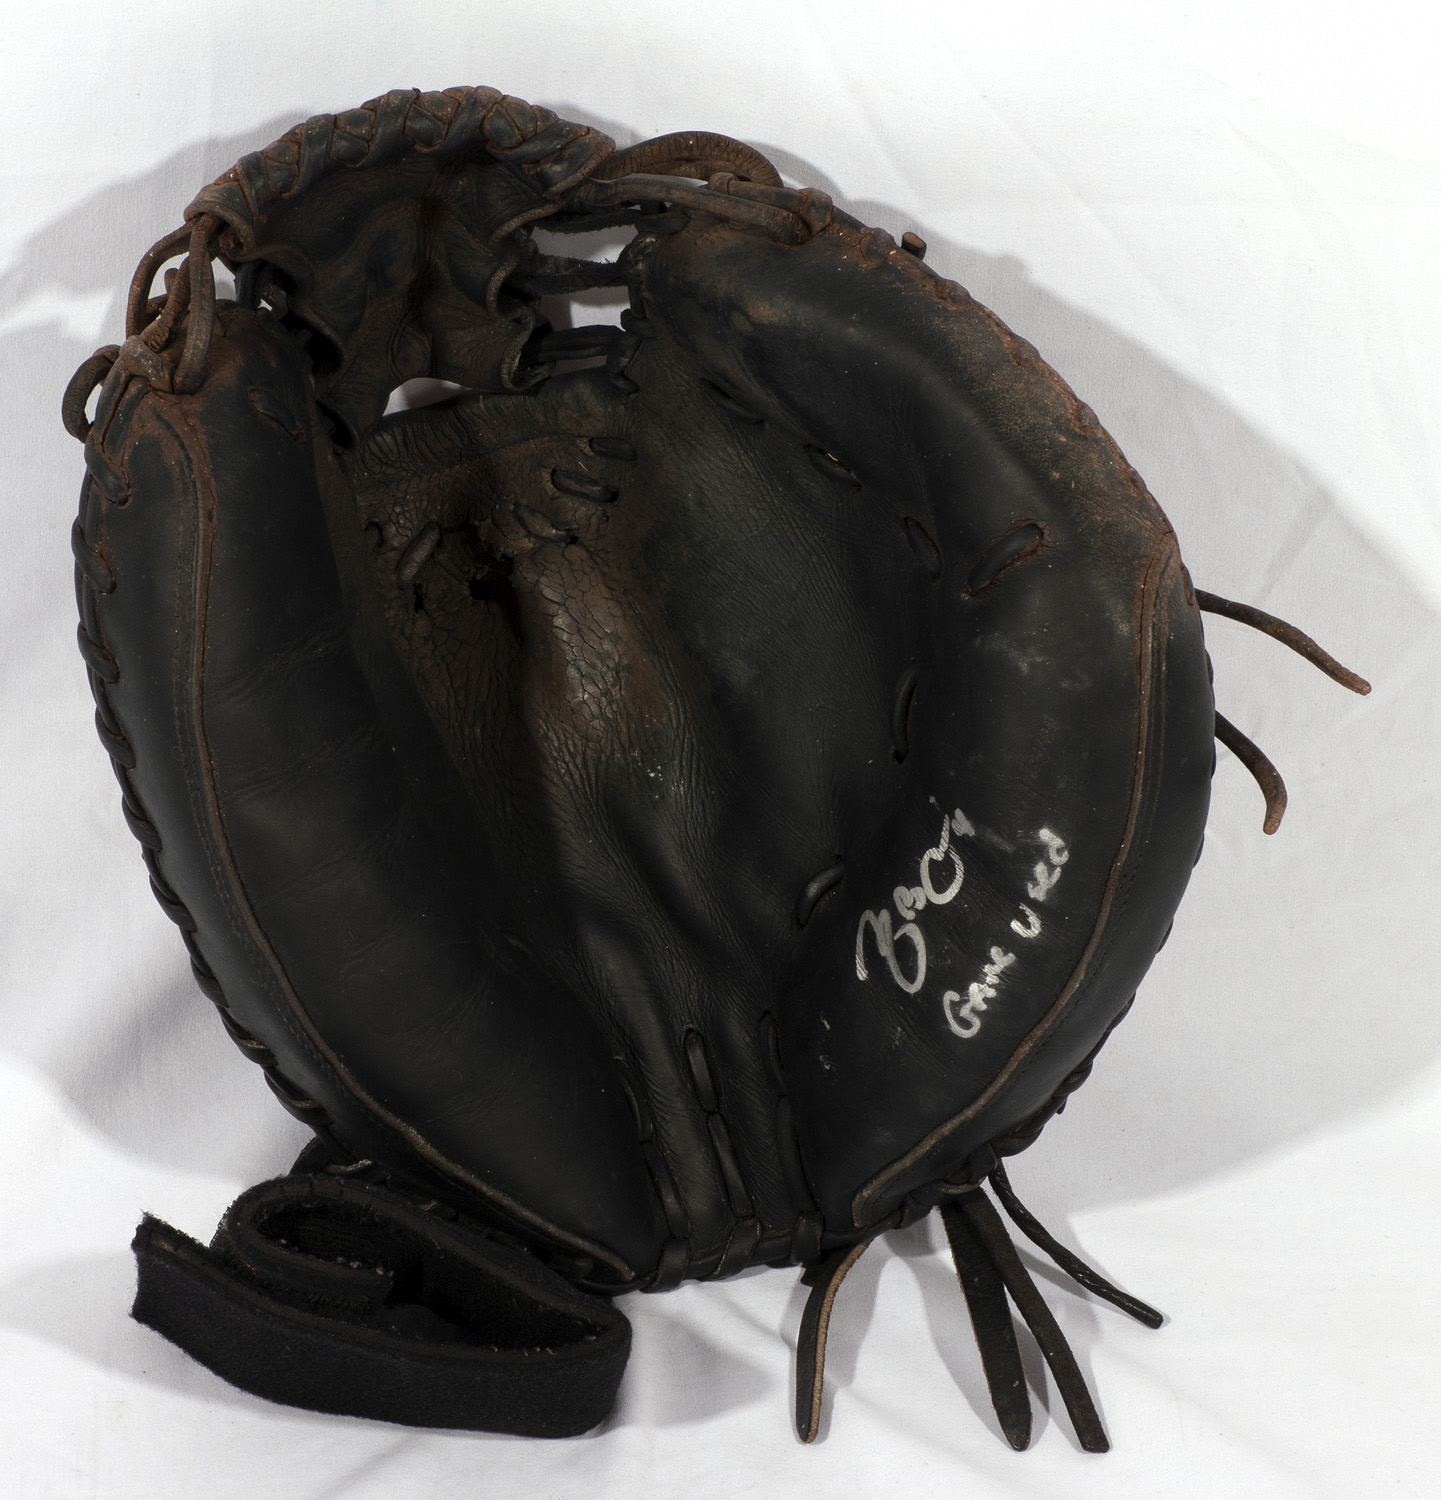 MLB Gloves, MLB Autographed Catchers Mitt, Game-Used Gloves